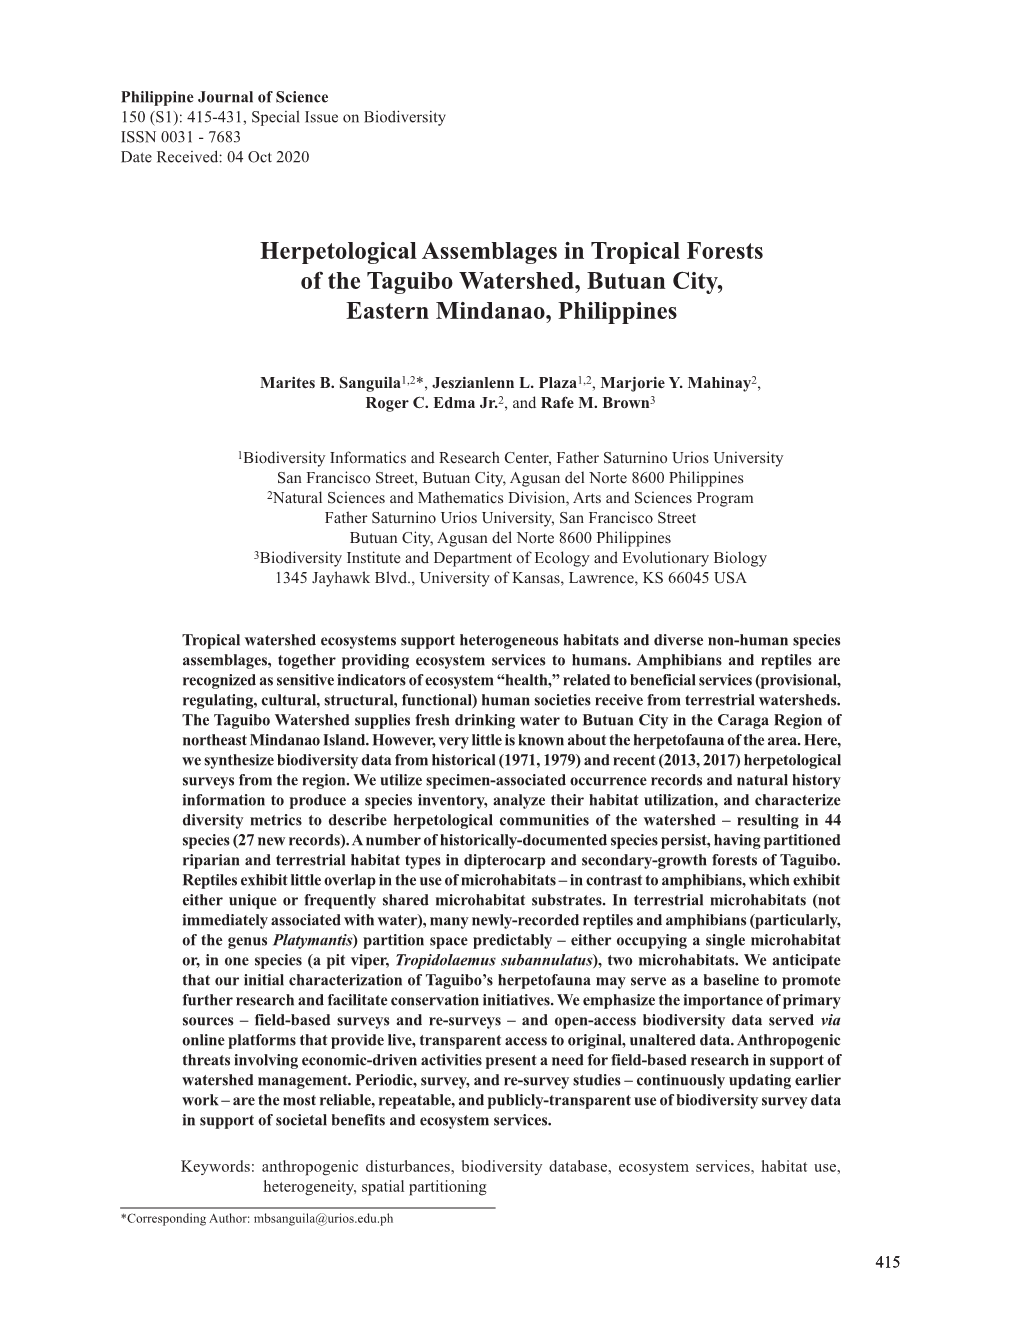 Herpetological Assemblages in Tropical Forests of the Taguibo Watershed, Butuan City, Eastern Mindanao, Philippines